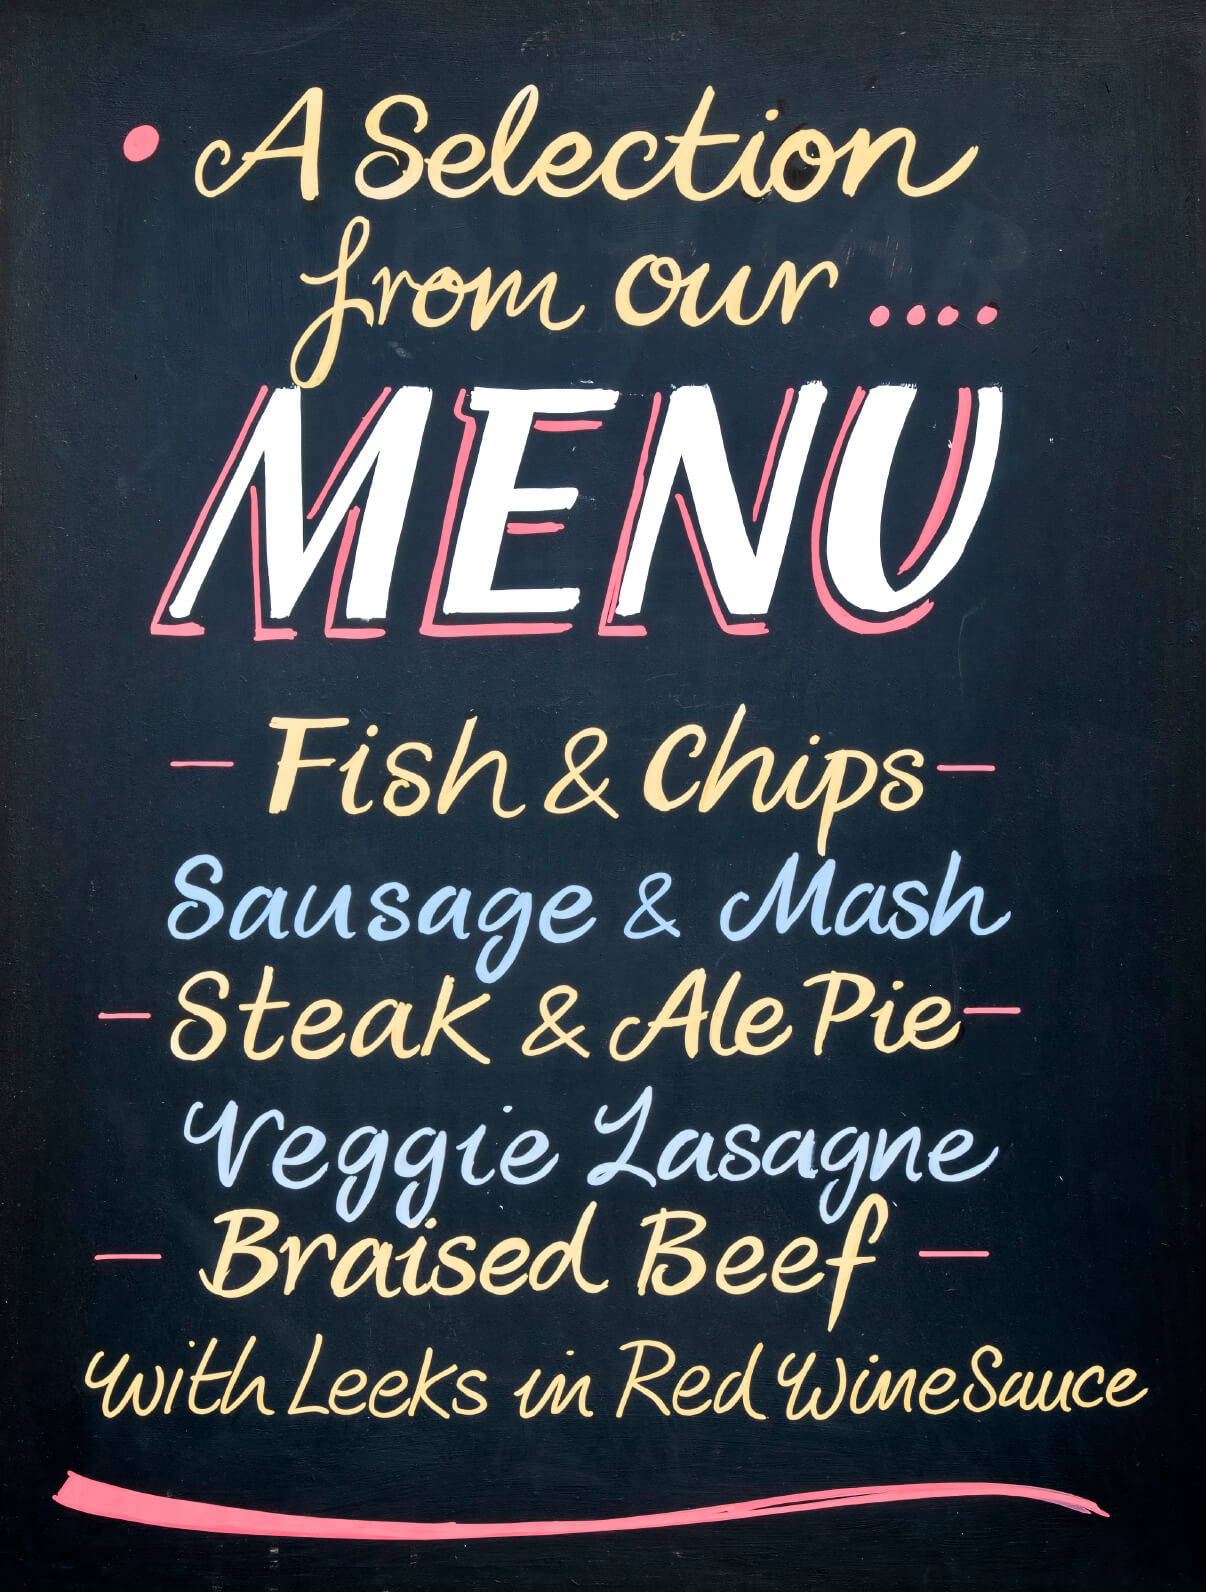 Small menus are easier to maintain and keep food costs and waste down.